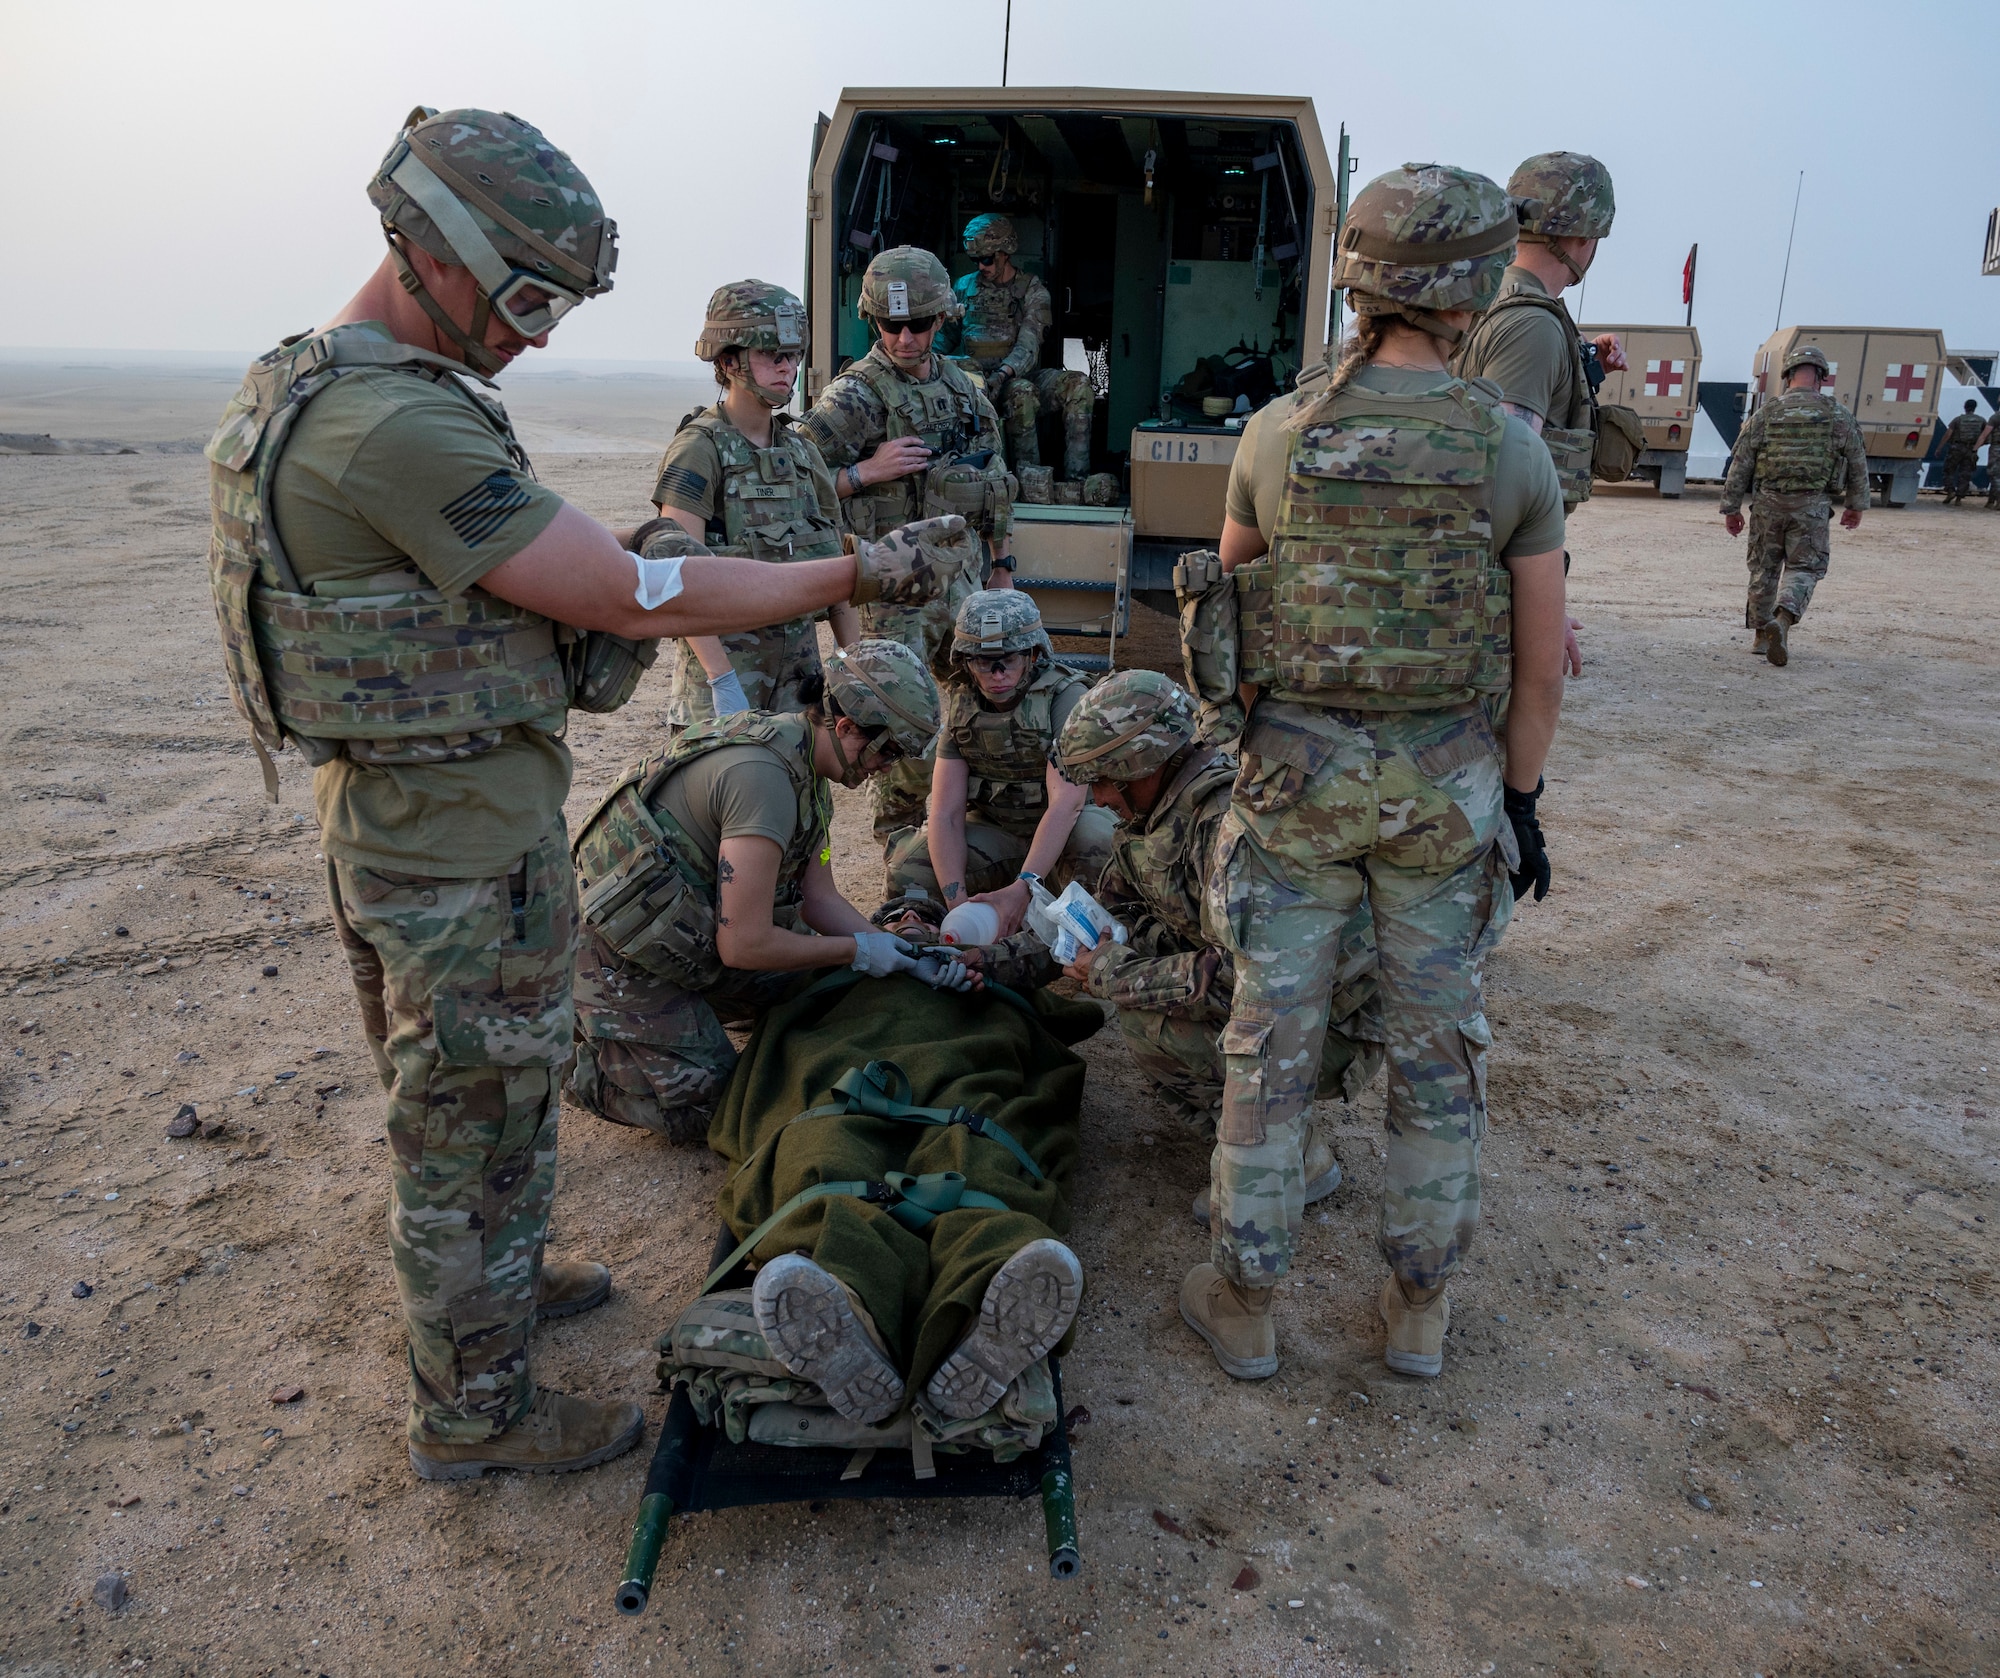 U.S. Army Soldiers prepare a patient for transport on a UH-60 Blackhawk helicopter at Udairi Range, Kuwait, March 14, 2023.